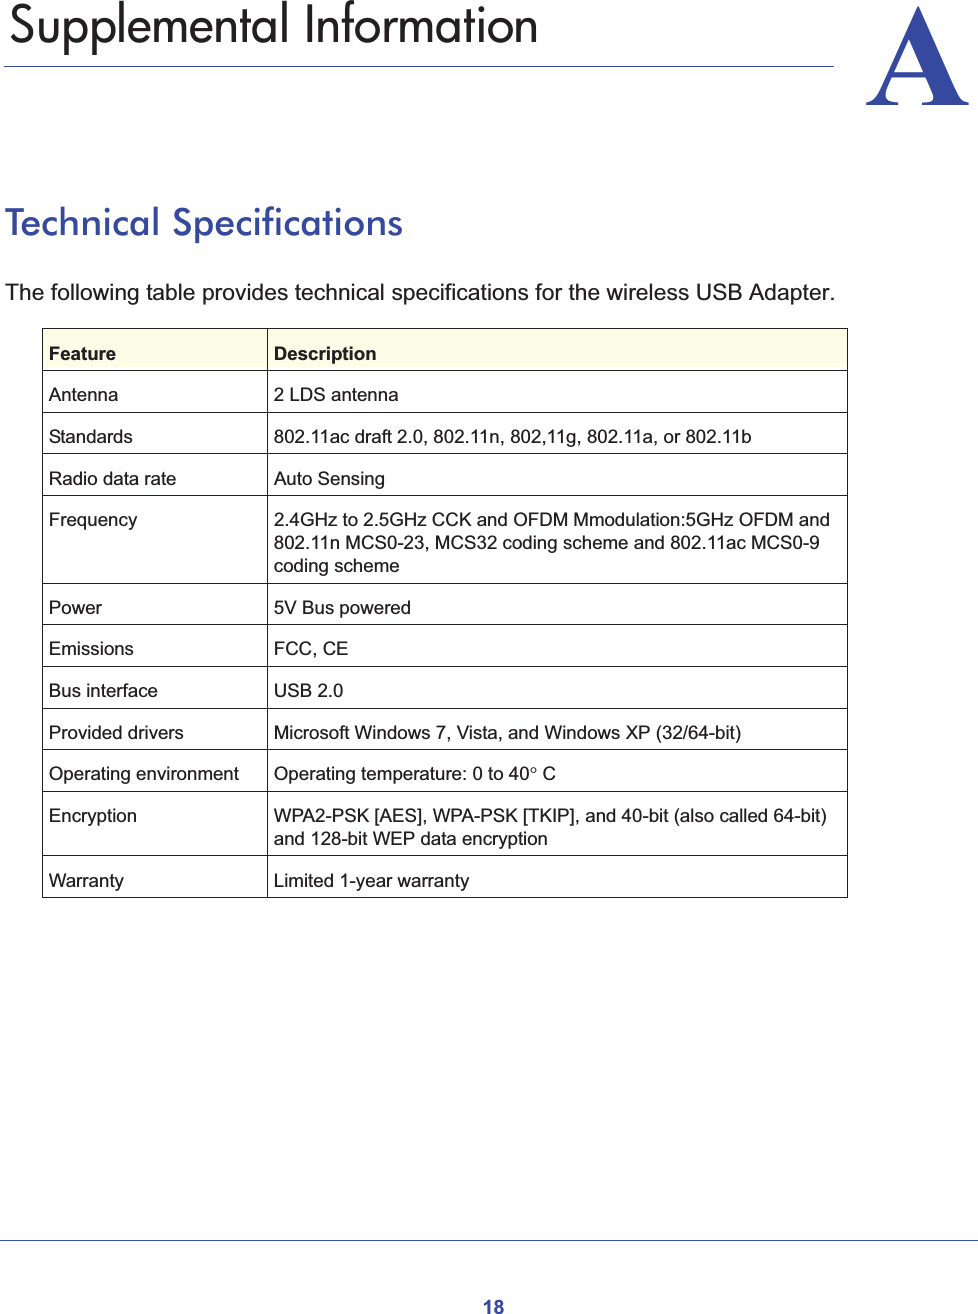 18AA.   Supplemental InformationTechnical SpecificationsThe following table provides technical specifications for the wireless USB Adapter. Feature DescriptionAntenna 2 LDS antennaStandards  802.11ac draft 2.0, 802.11n, 802,11g, 802.11a, or 802.11bRadio data rate Auto SensingFrequency 2.4GHz to 2.5GHz CCK and OFDM Mmodulation:5GHz OFDM and 802.11n MCS0-23, MCS32 coding scheme and 802.11ac MCS0-9 coding schemePower 5V Bus poweredEmissions FCC, CEBus interface USB 2.0Provided drivers Microsoft Windows 7, Vista, and Windows XP (32/64-bit)Operating environment  Operating temperature: 0 to 40q CEncryption WPA2-PSK [AES], WPA-PSK [TKIP], and 40-bit (also called 64-bit) and 128-bit WEP data encryptionWarranty Limited 1-year warranty